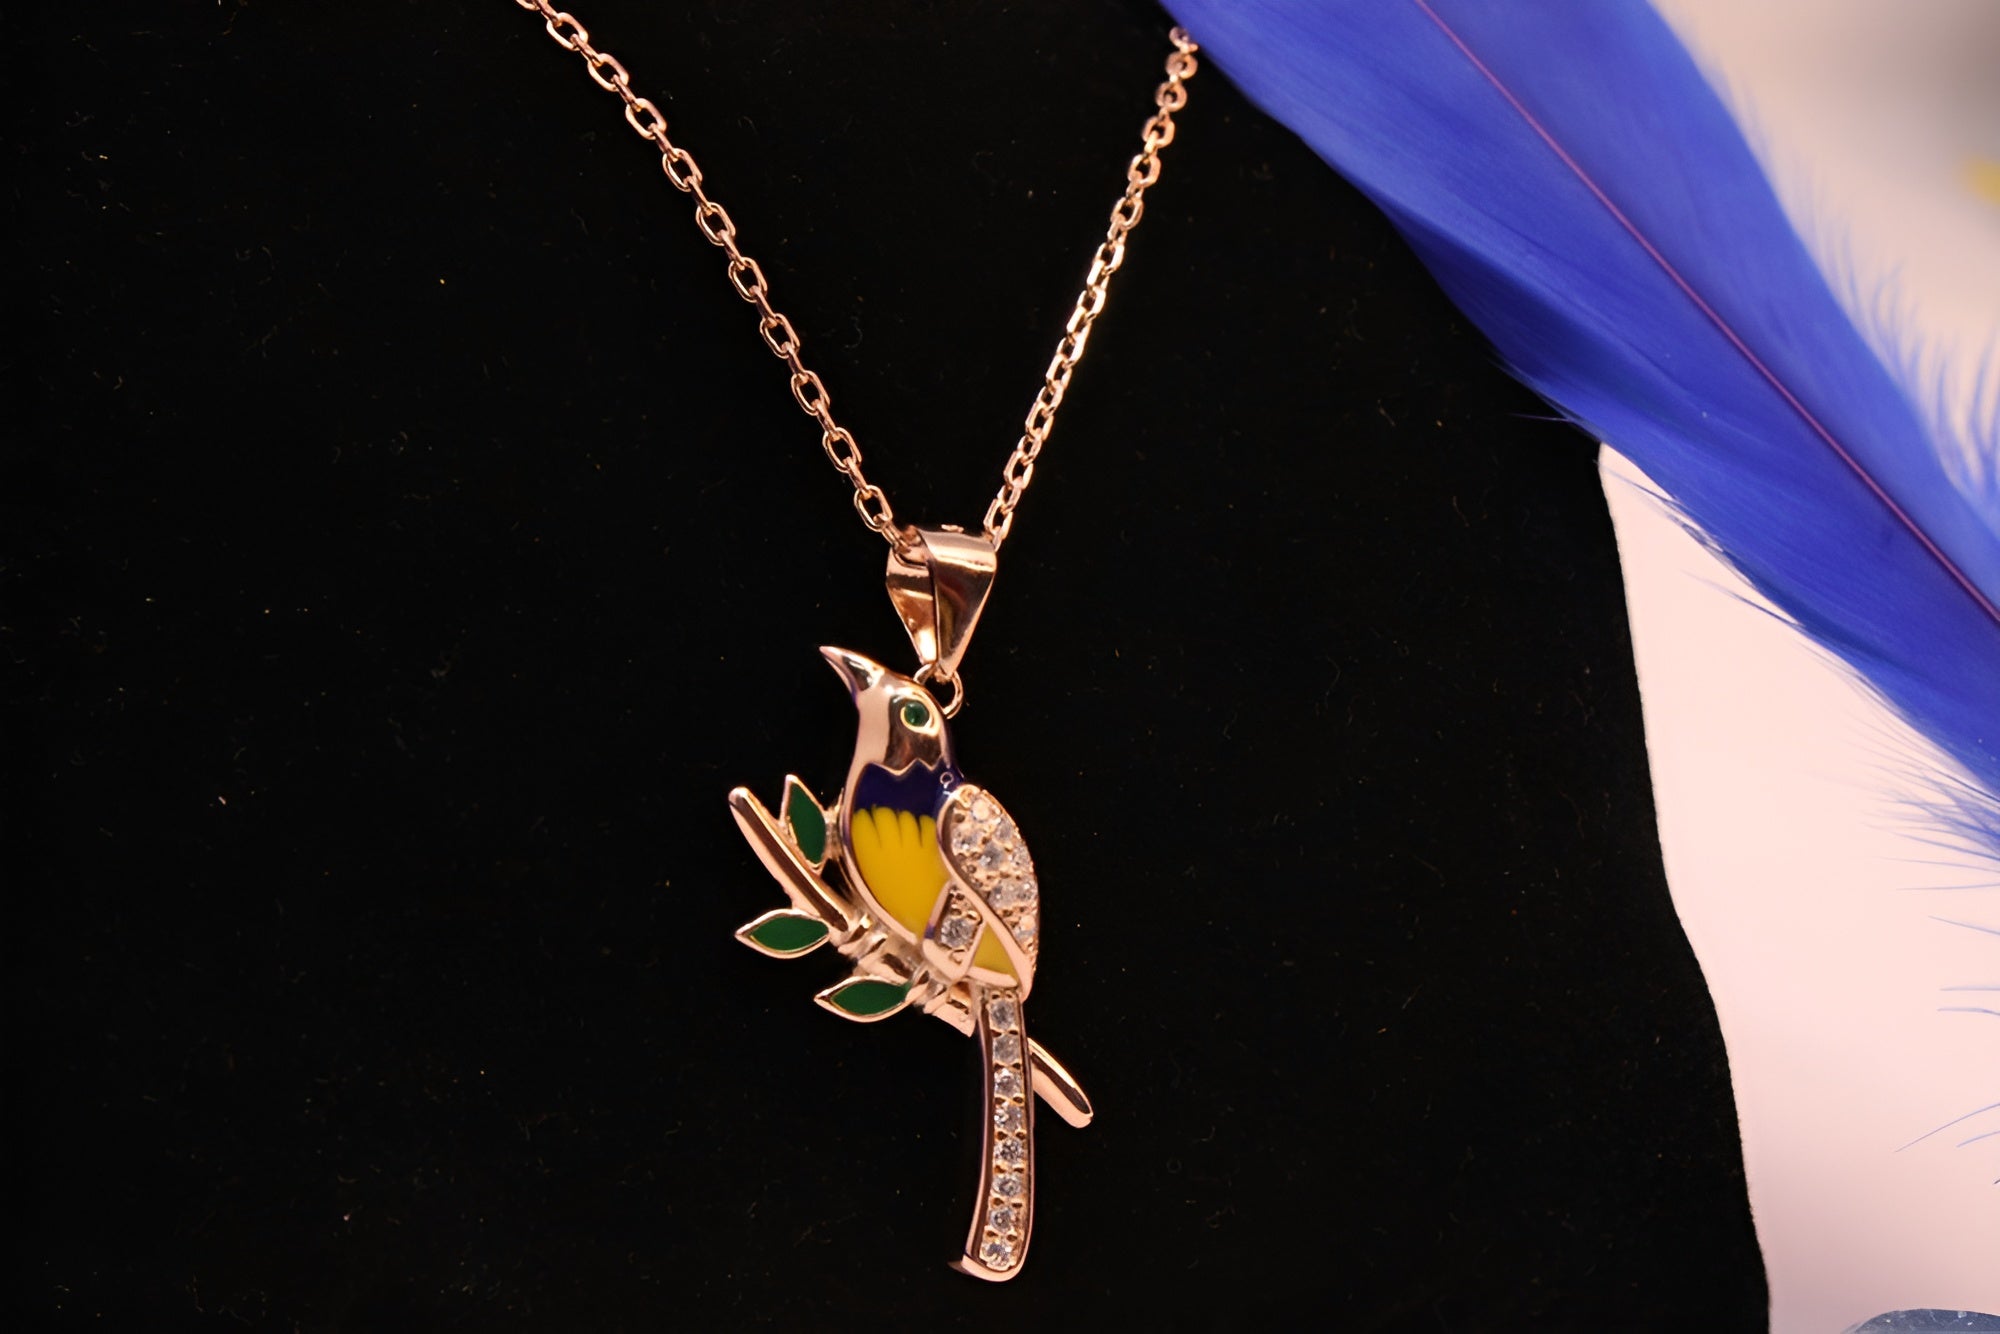 Sterling Silver with Copper-Gold Color Black and Yellow Bird Pendant